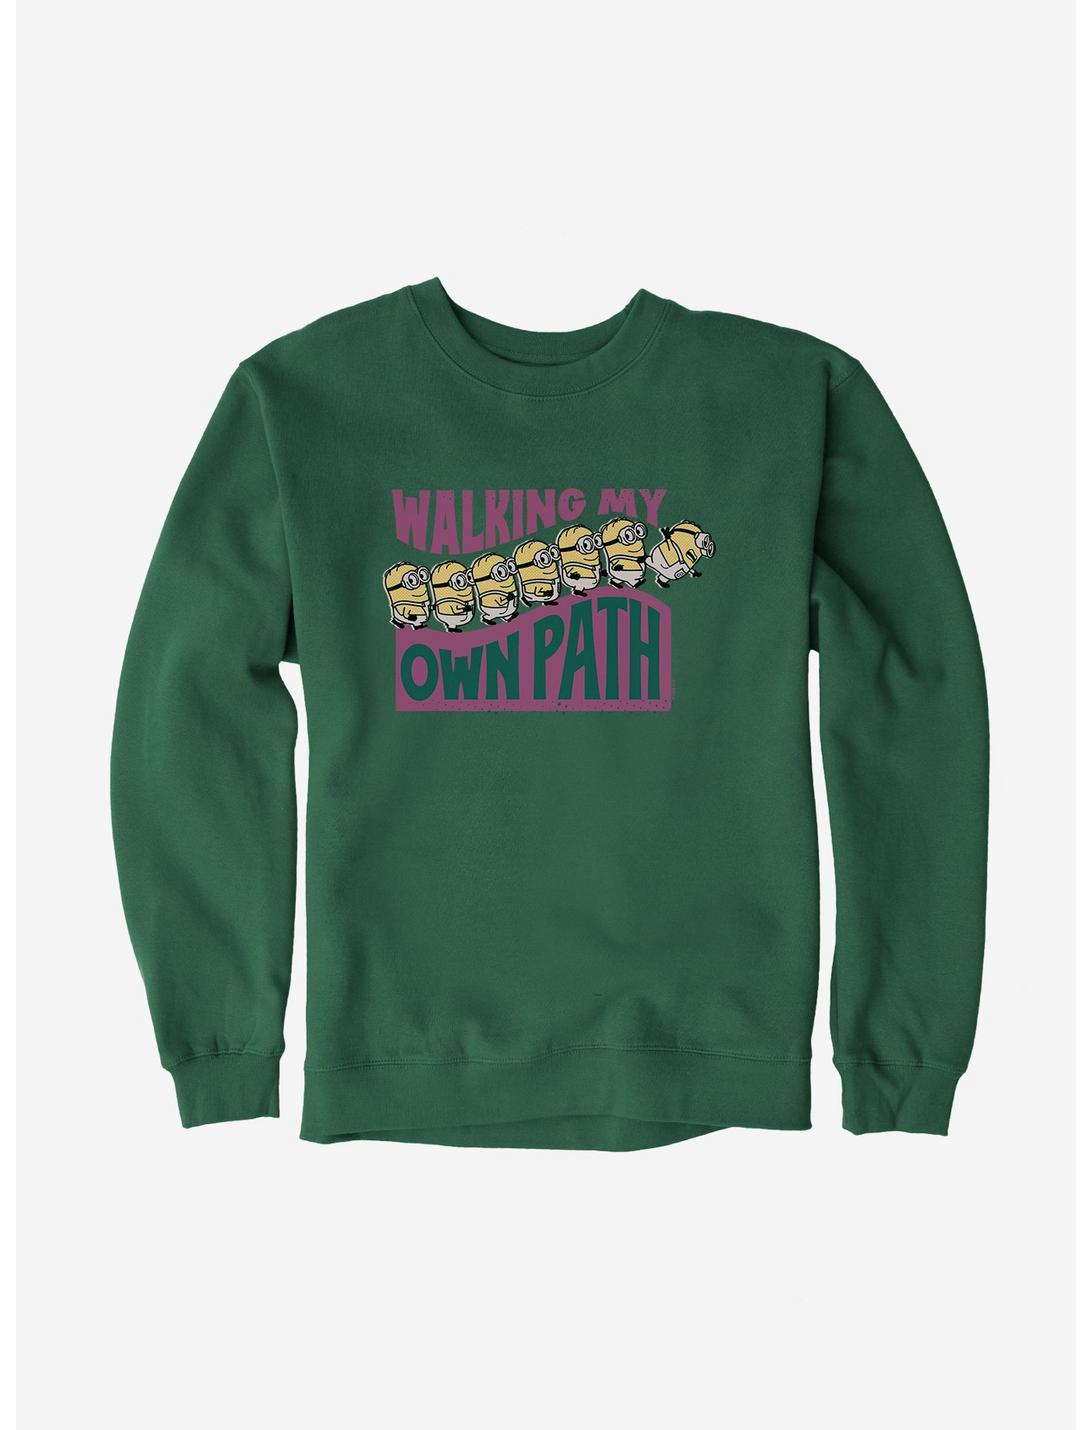 Minions On My Own Path Sweatshirt, FOREST, hi-res